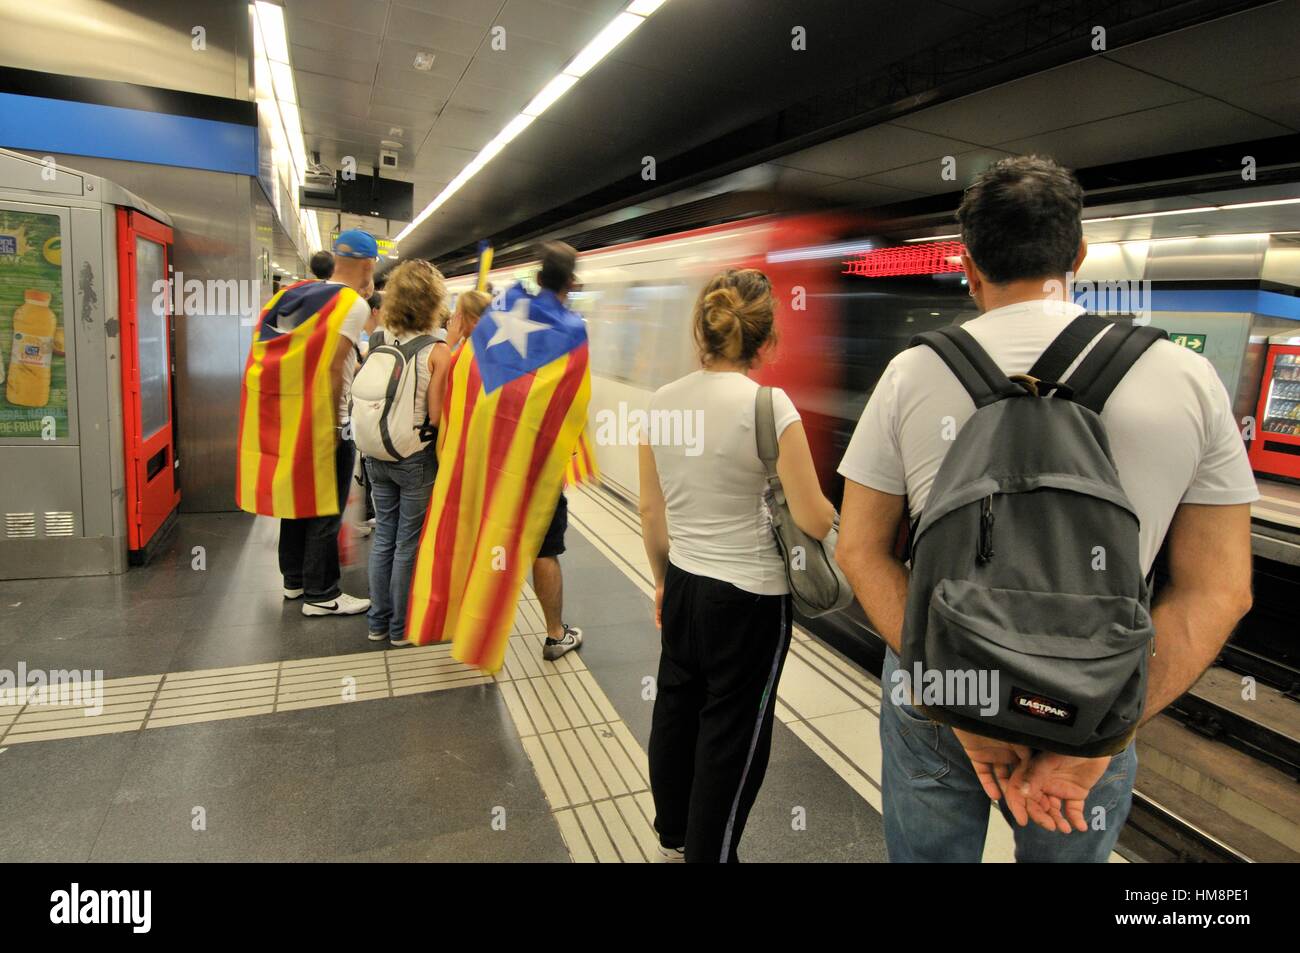 Catalonia independentists flags in a subway station.  September 11, 2015, Barcelona, Catalonia, Spain Stock Photo